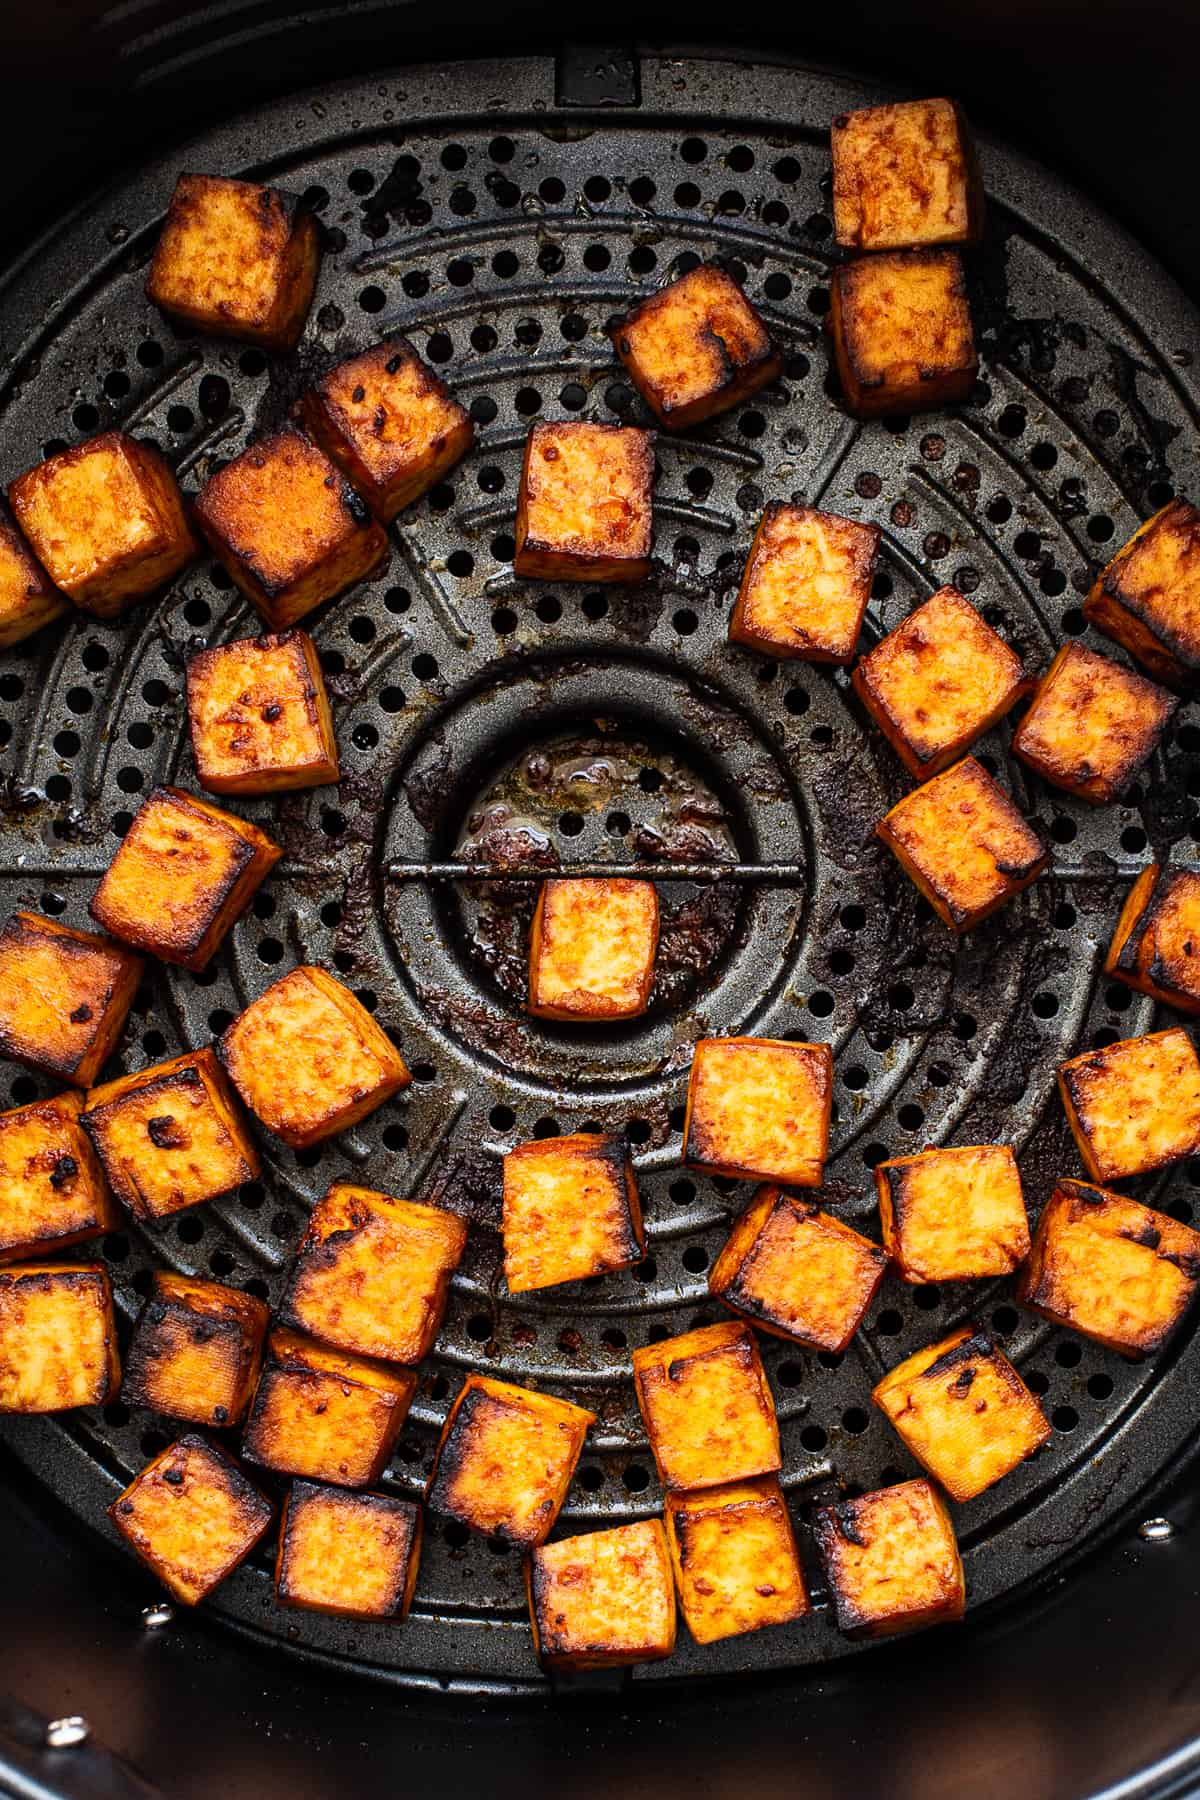 Tofu crisped up in the air fryer.